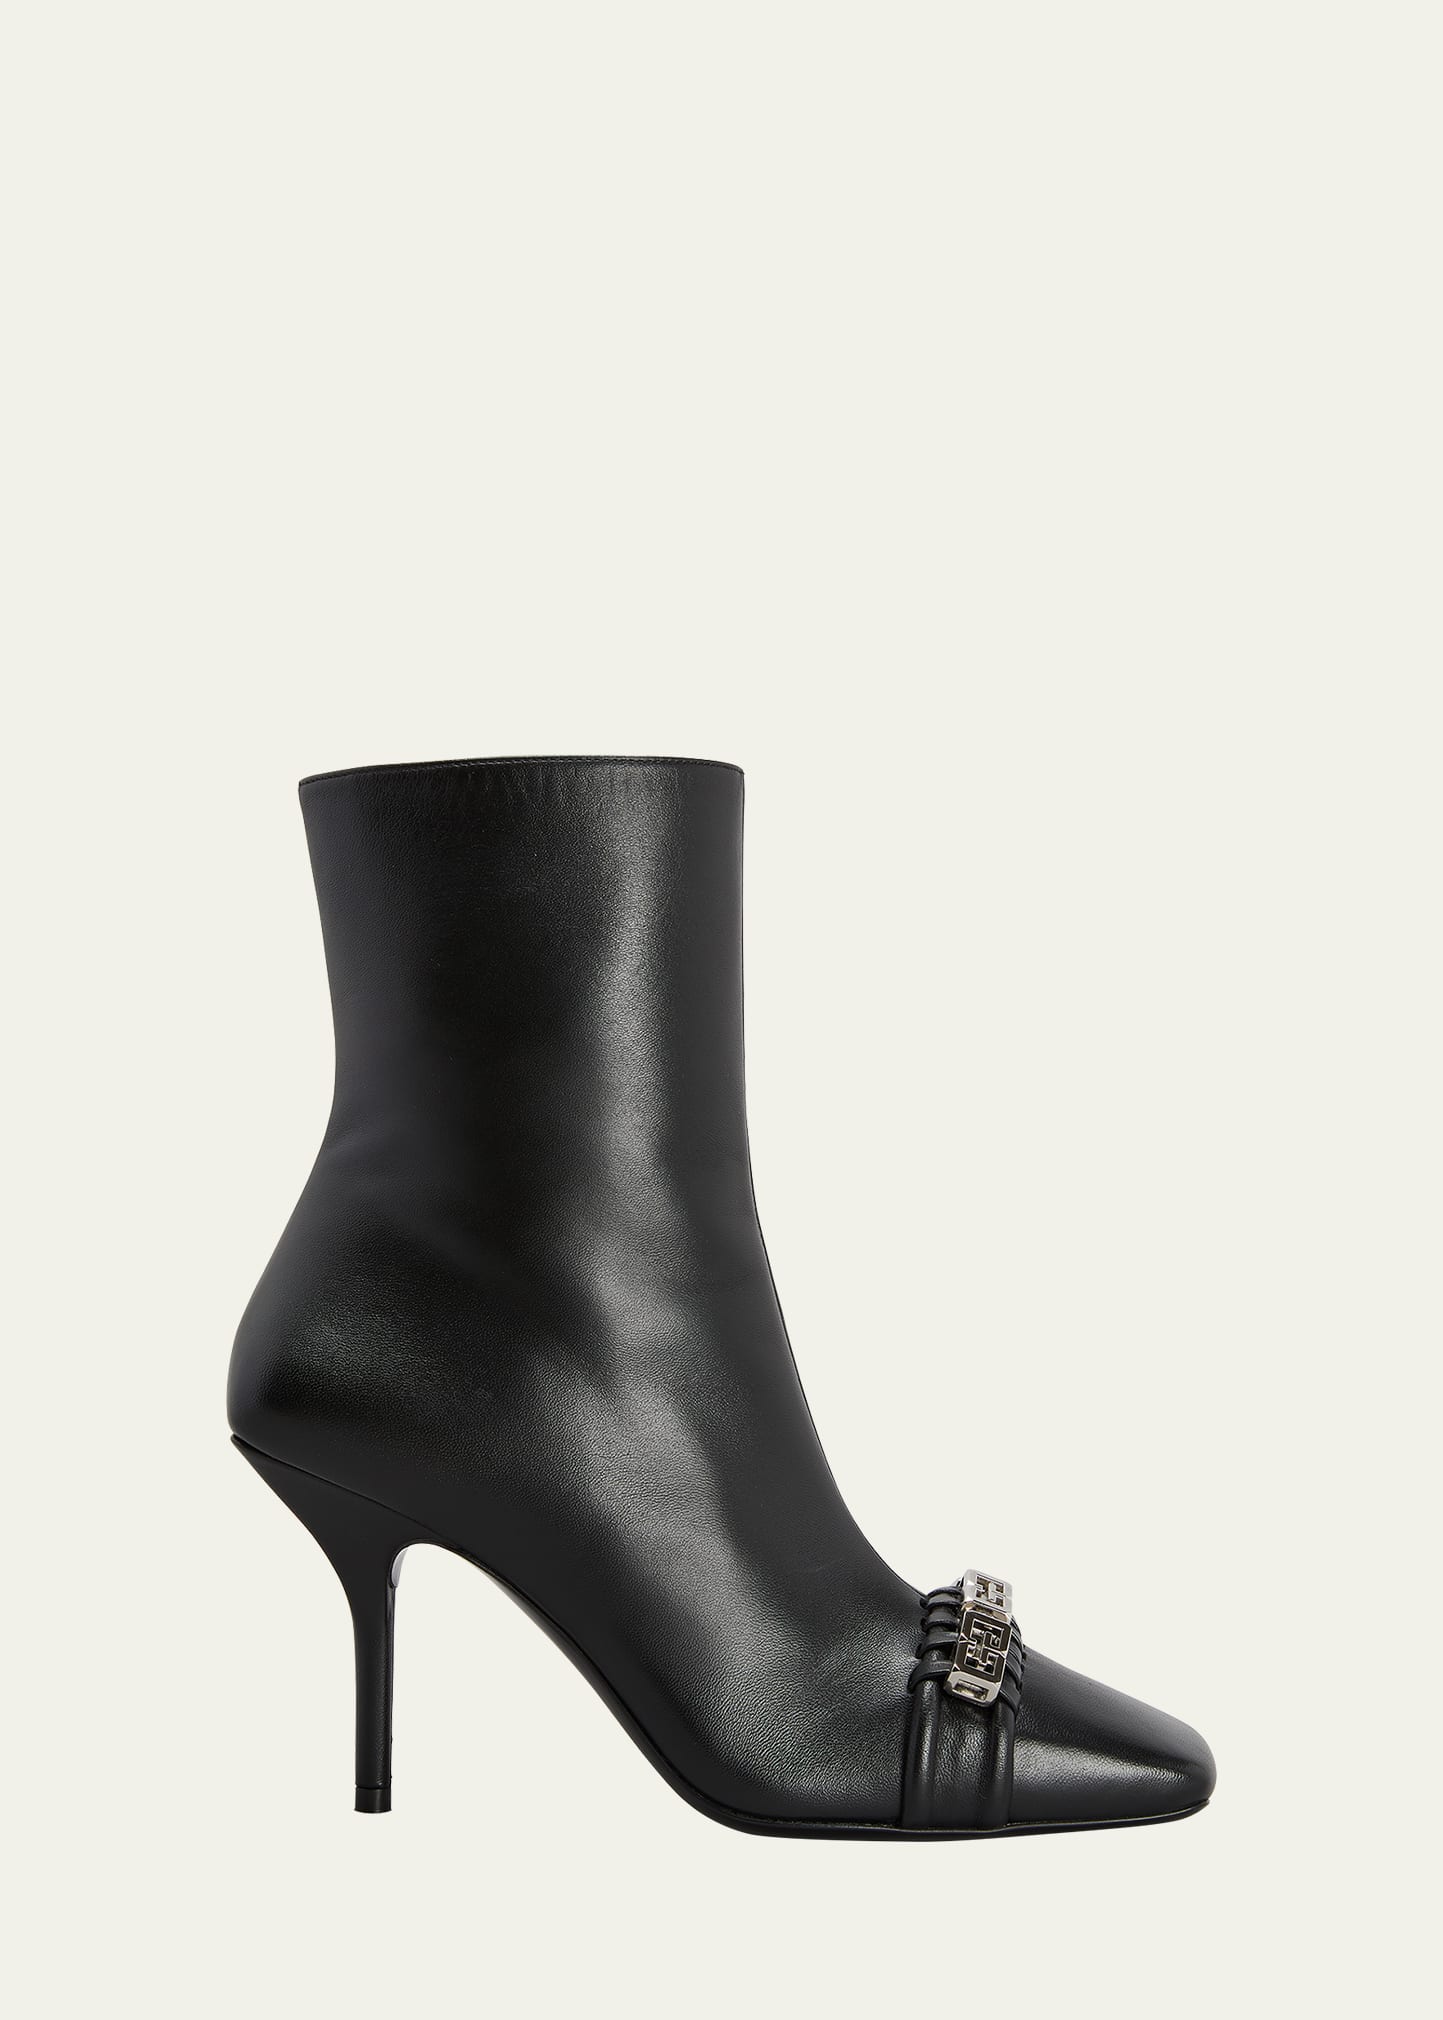 Givenchy Woven G Chain Ankle Booties